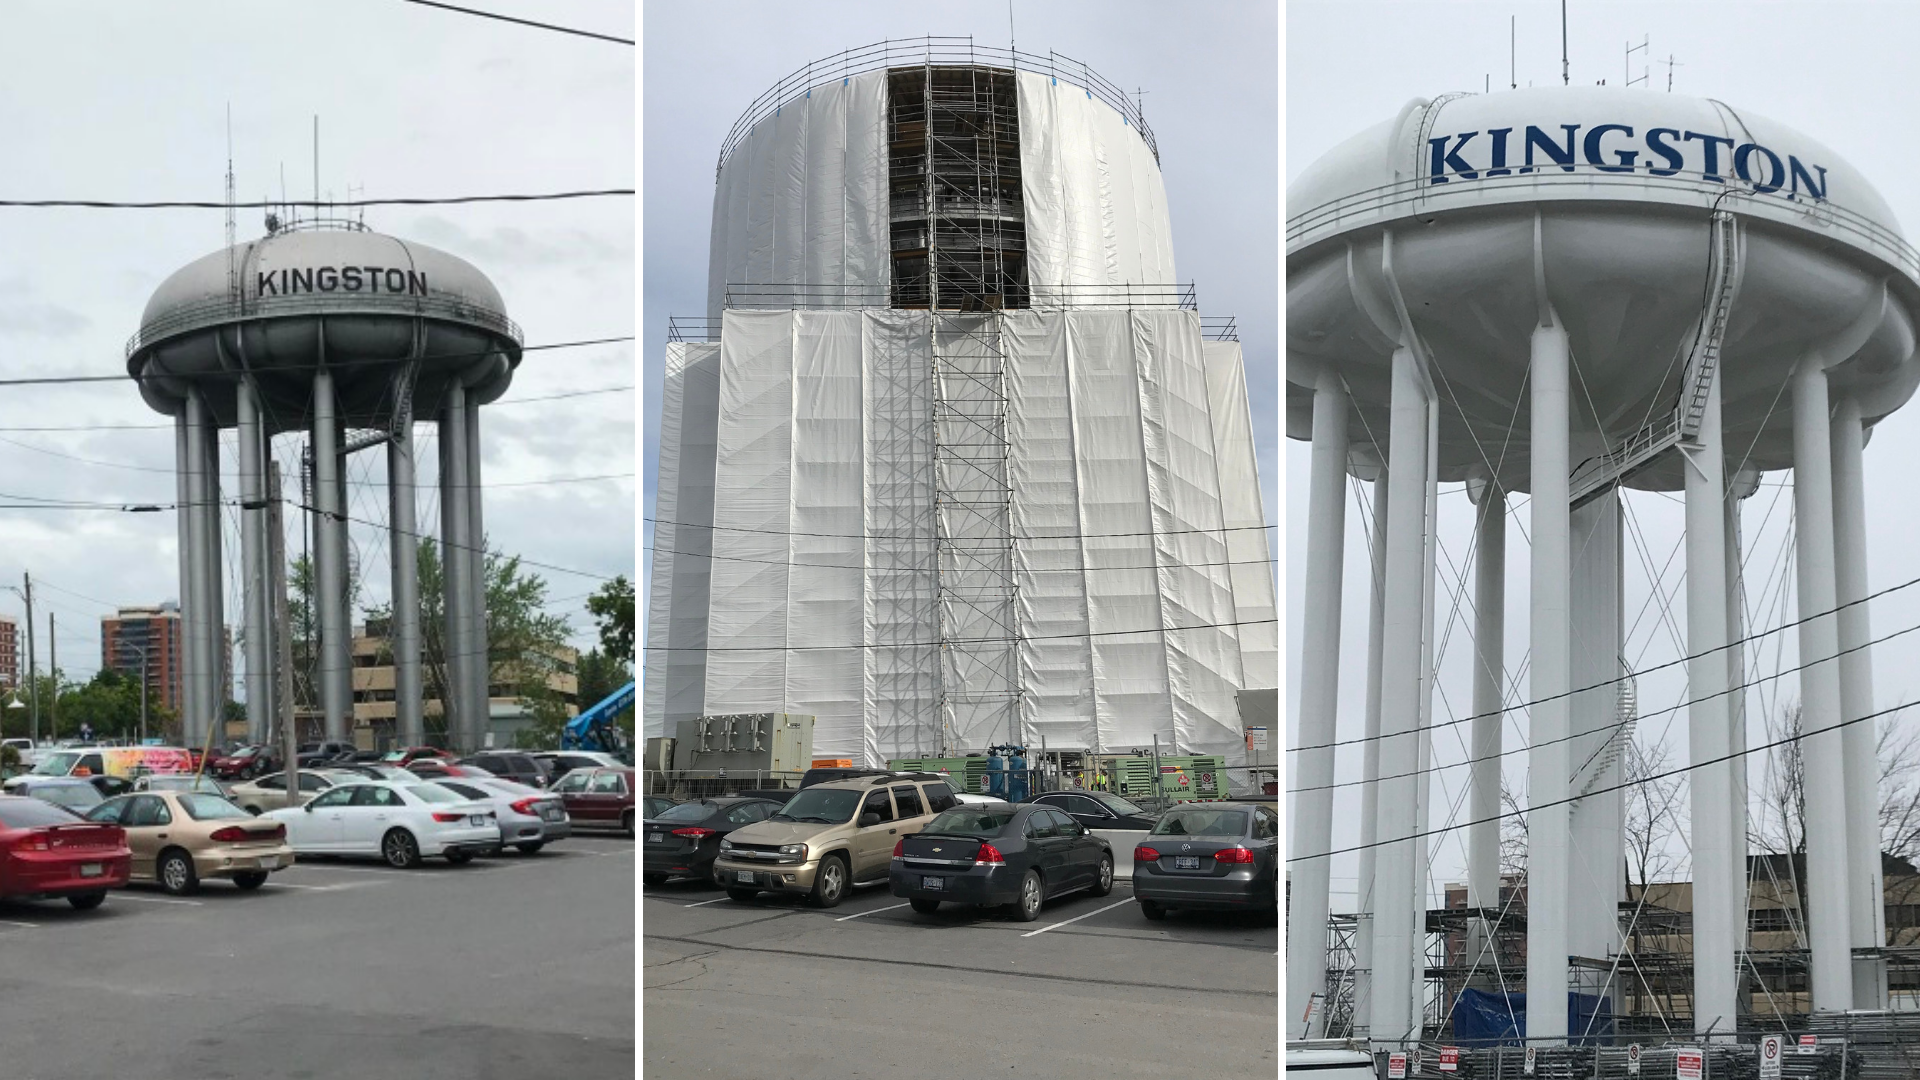 Photos show the facility before, during and after construction